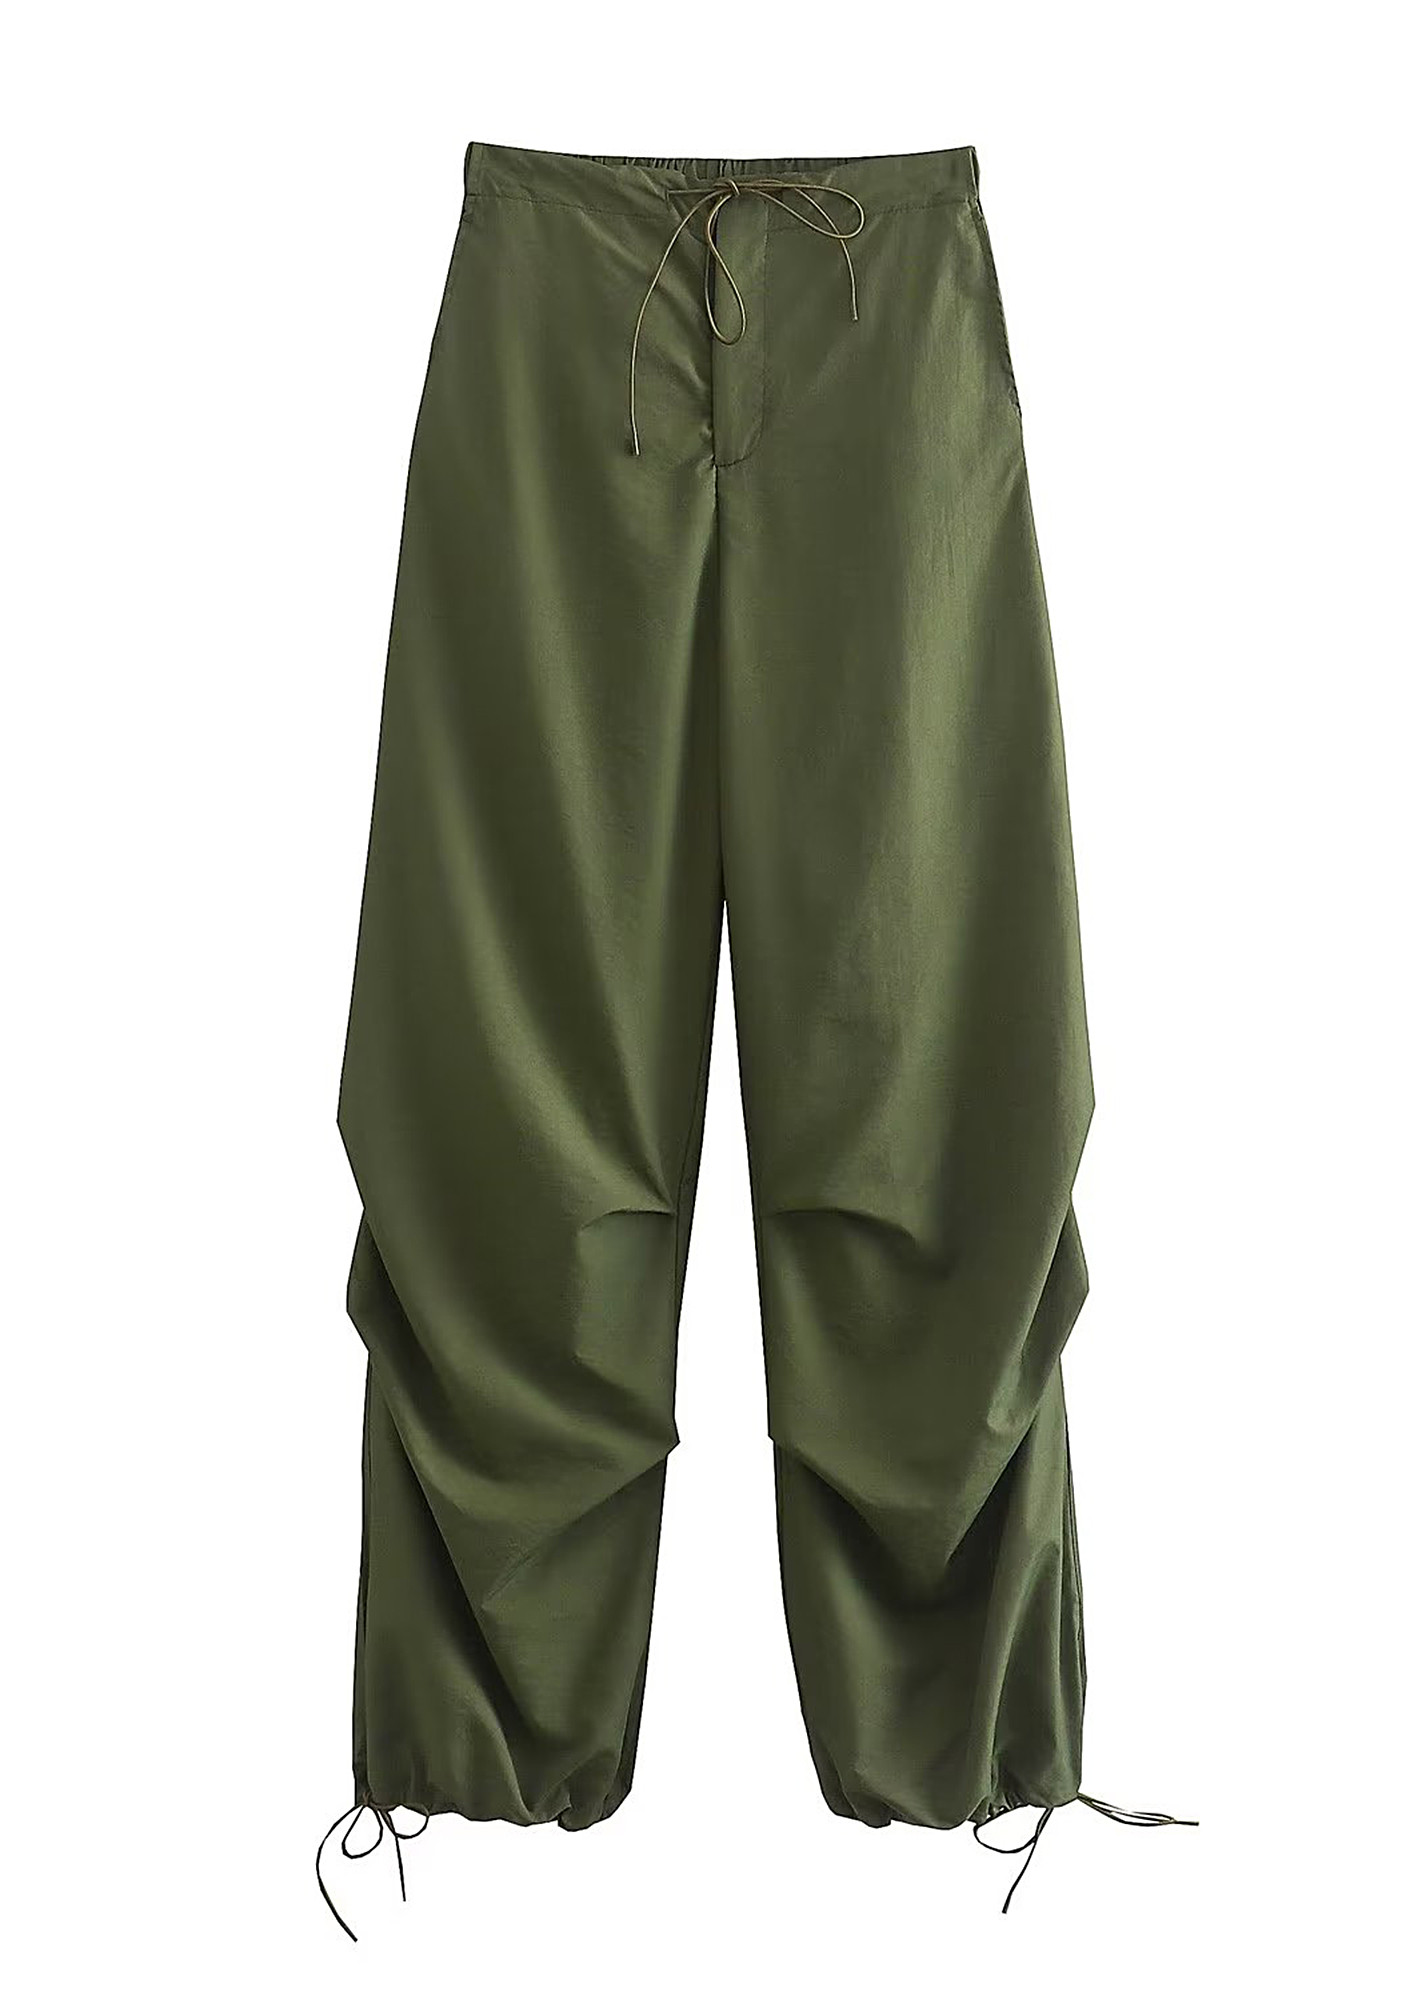 Buy Dark Green Formal Suit Trousers for Men Online at SELECTED  HOMME|278312401